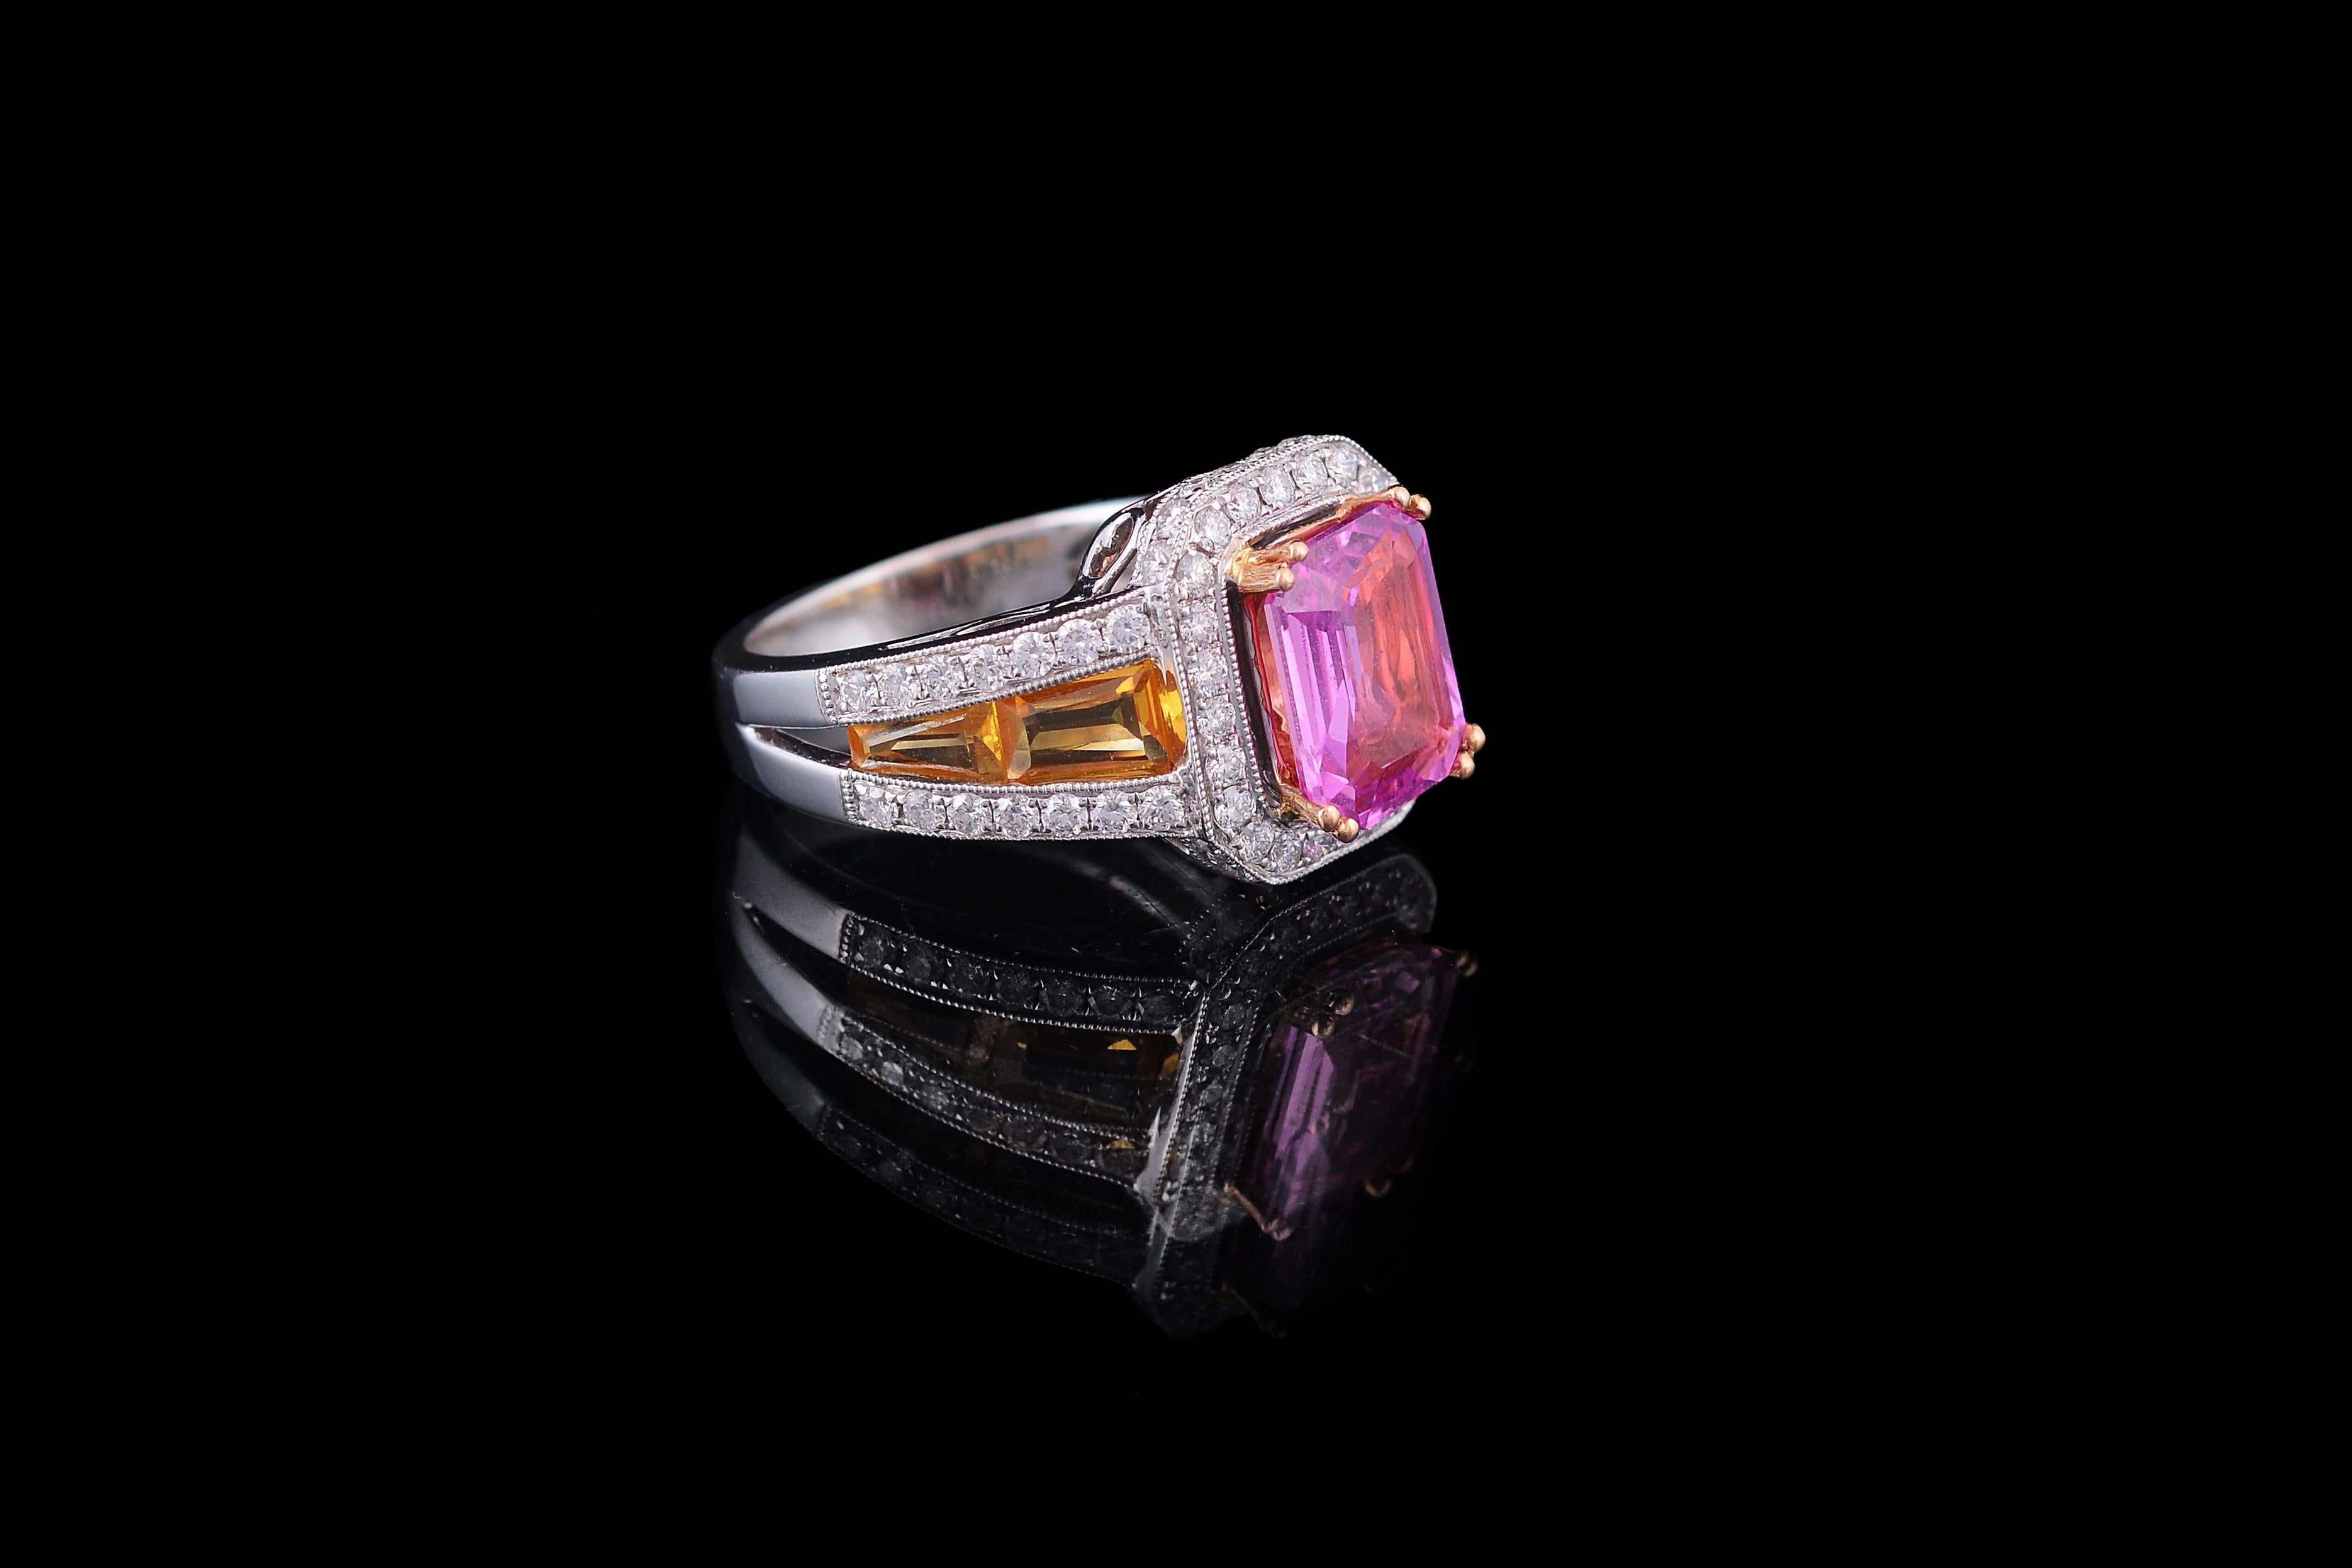 A classic GRS certified pink and yellow sapphire 3 stone ring with diamonds set in 18K gold. The certificate indicates that the pink sapphire in heated and originates from Madagascar. The weight of the pink sapphire is 2.75 carats, and yellow